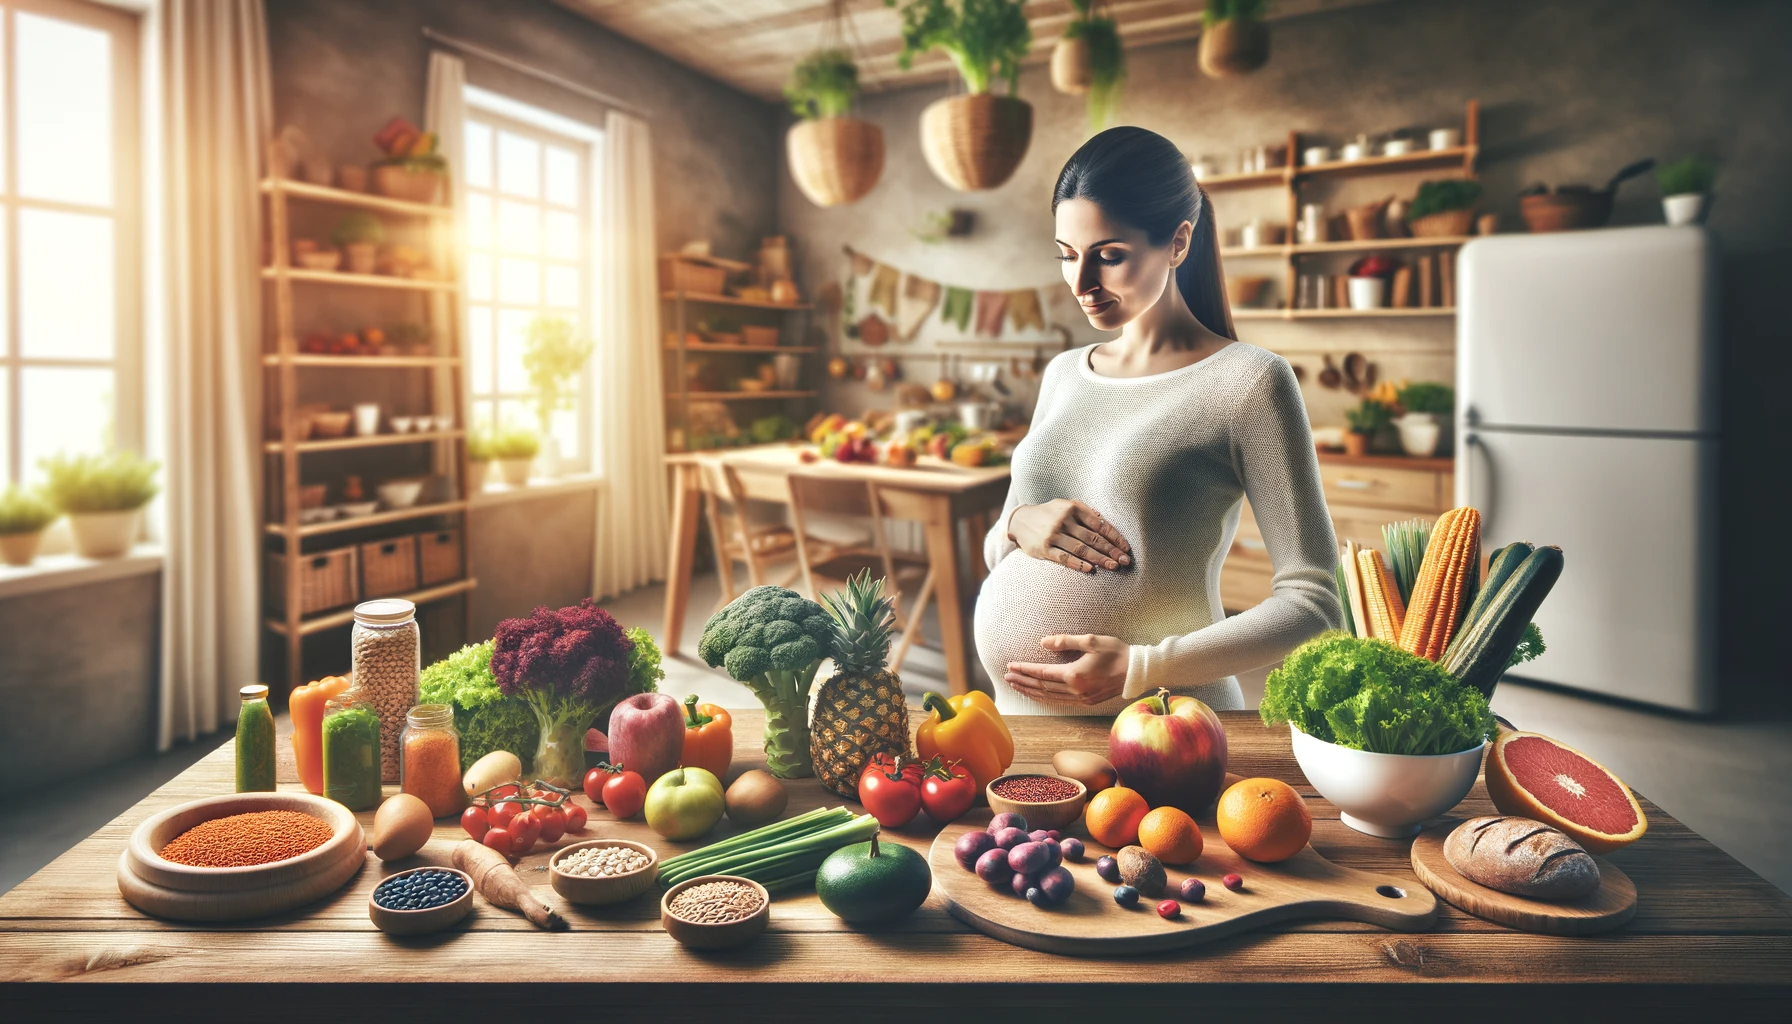 Study: Association of Plant-Based Dietary Patterns in the First Trimester of Pregnancy with Pregnancy Weight Gain: Results from a Prospective Birth Cohort